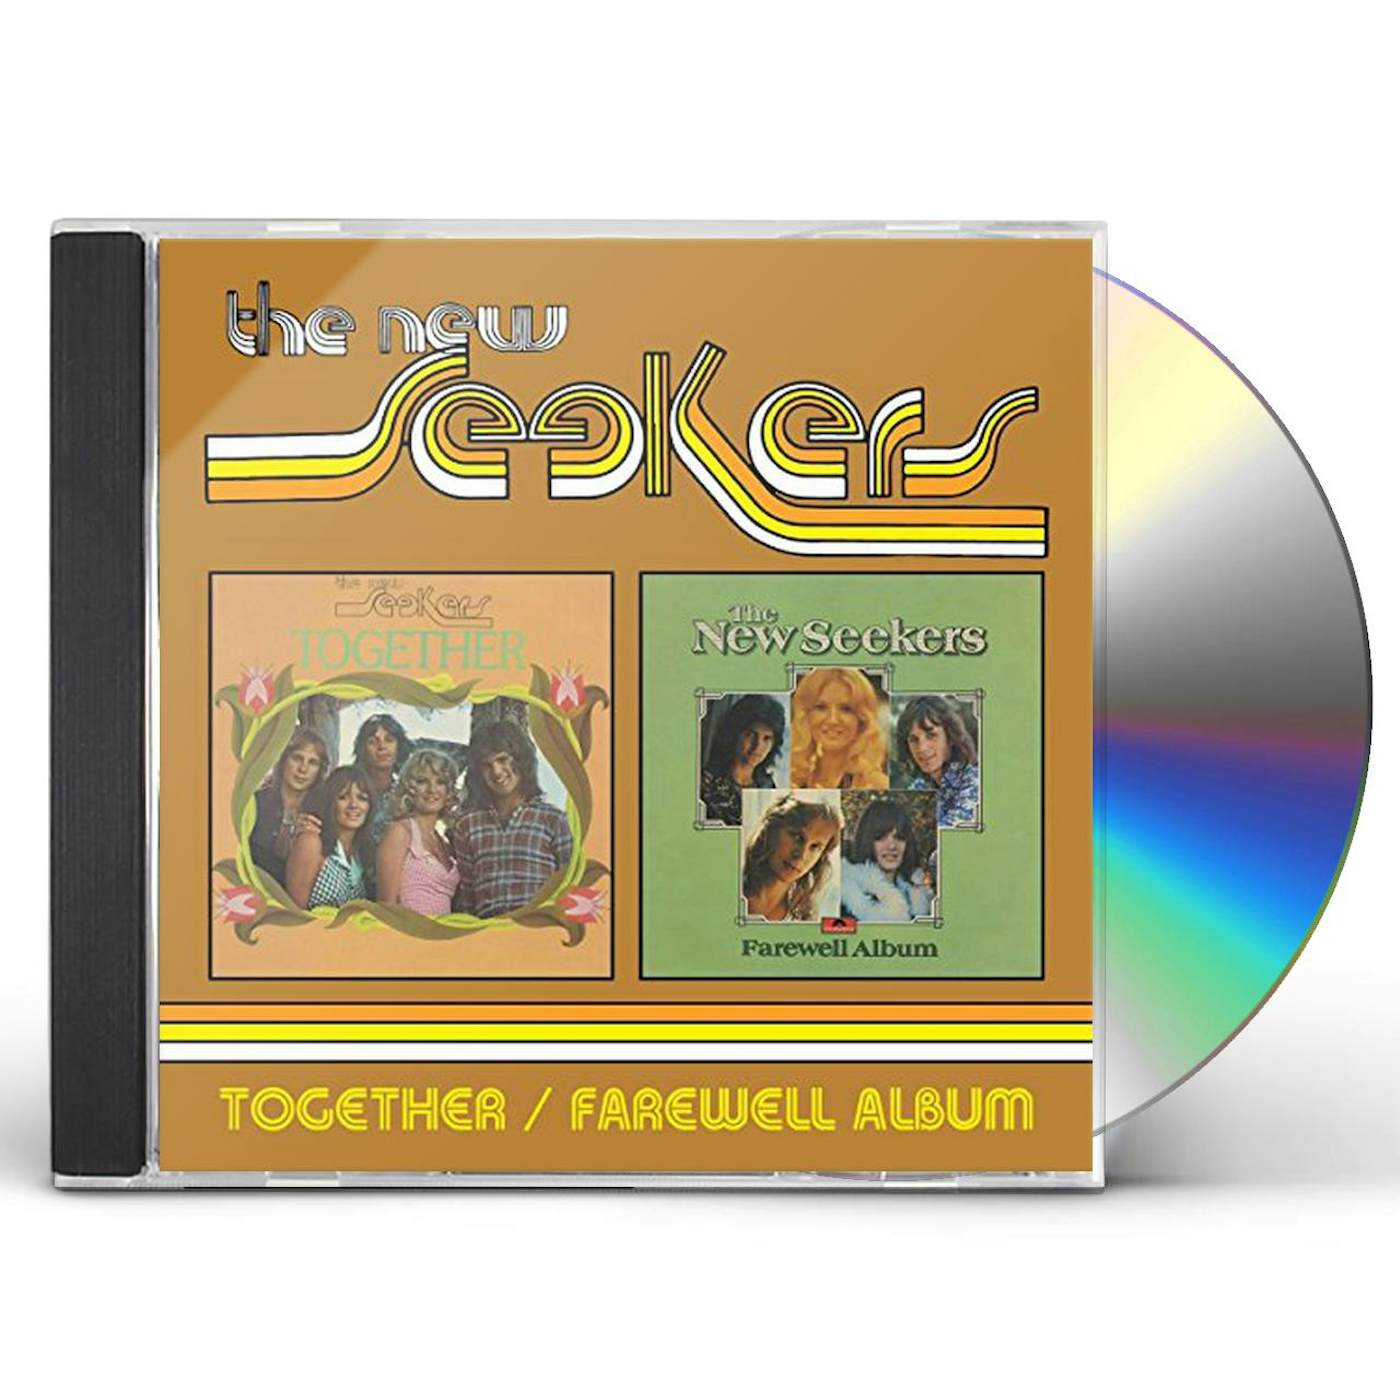 The New Seekers TOGETHER / FAREWELL ALBUM CD